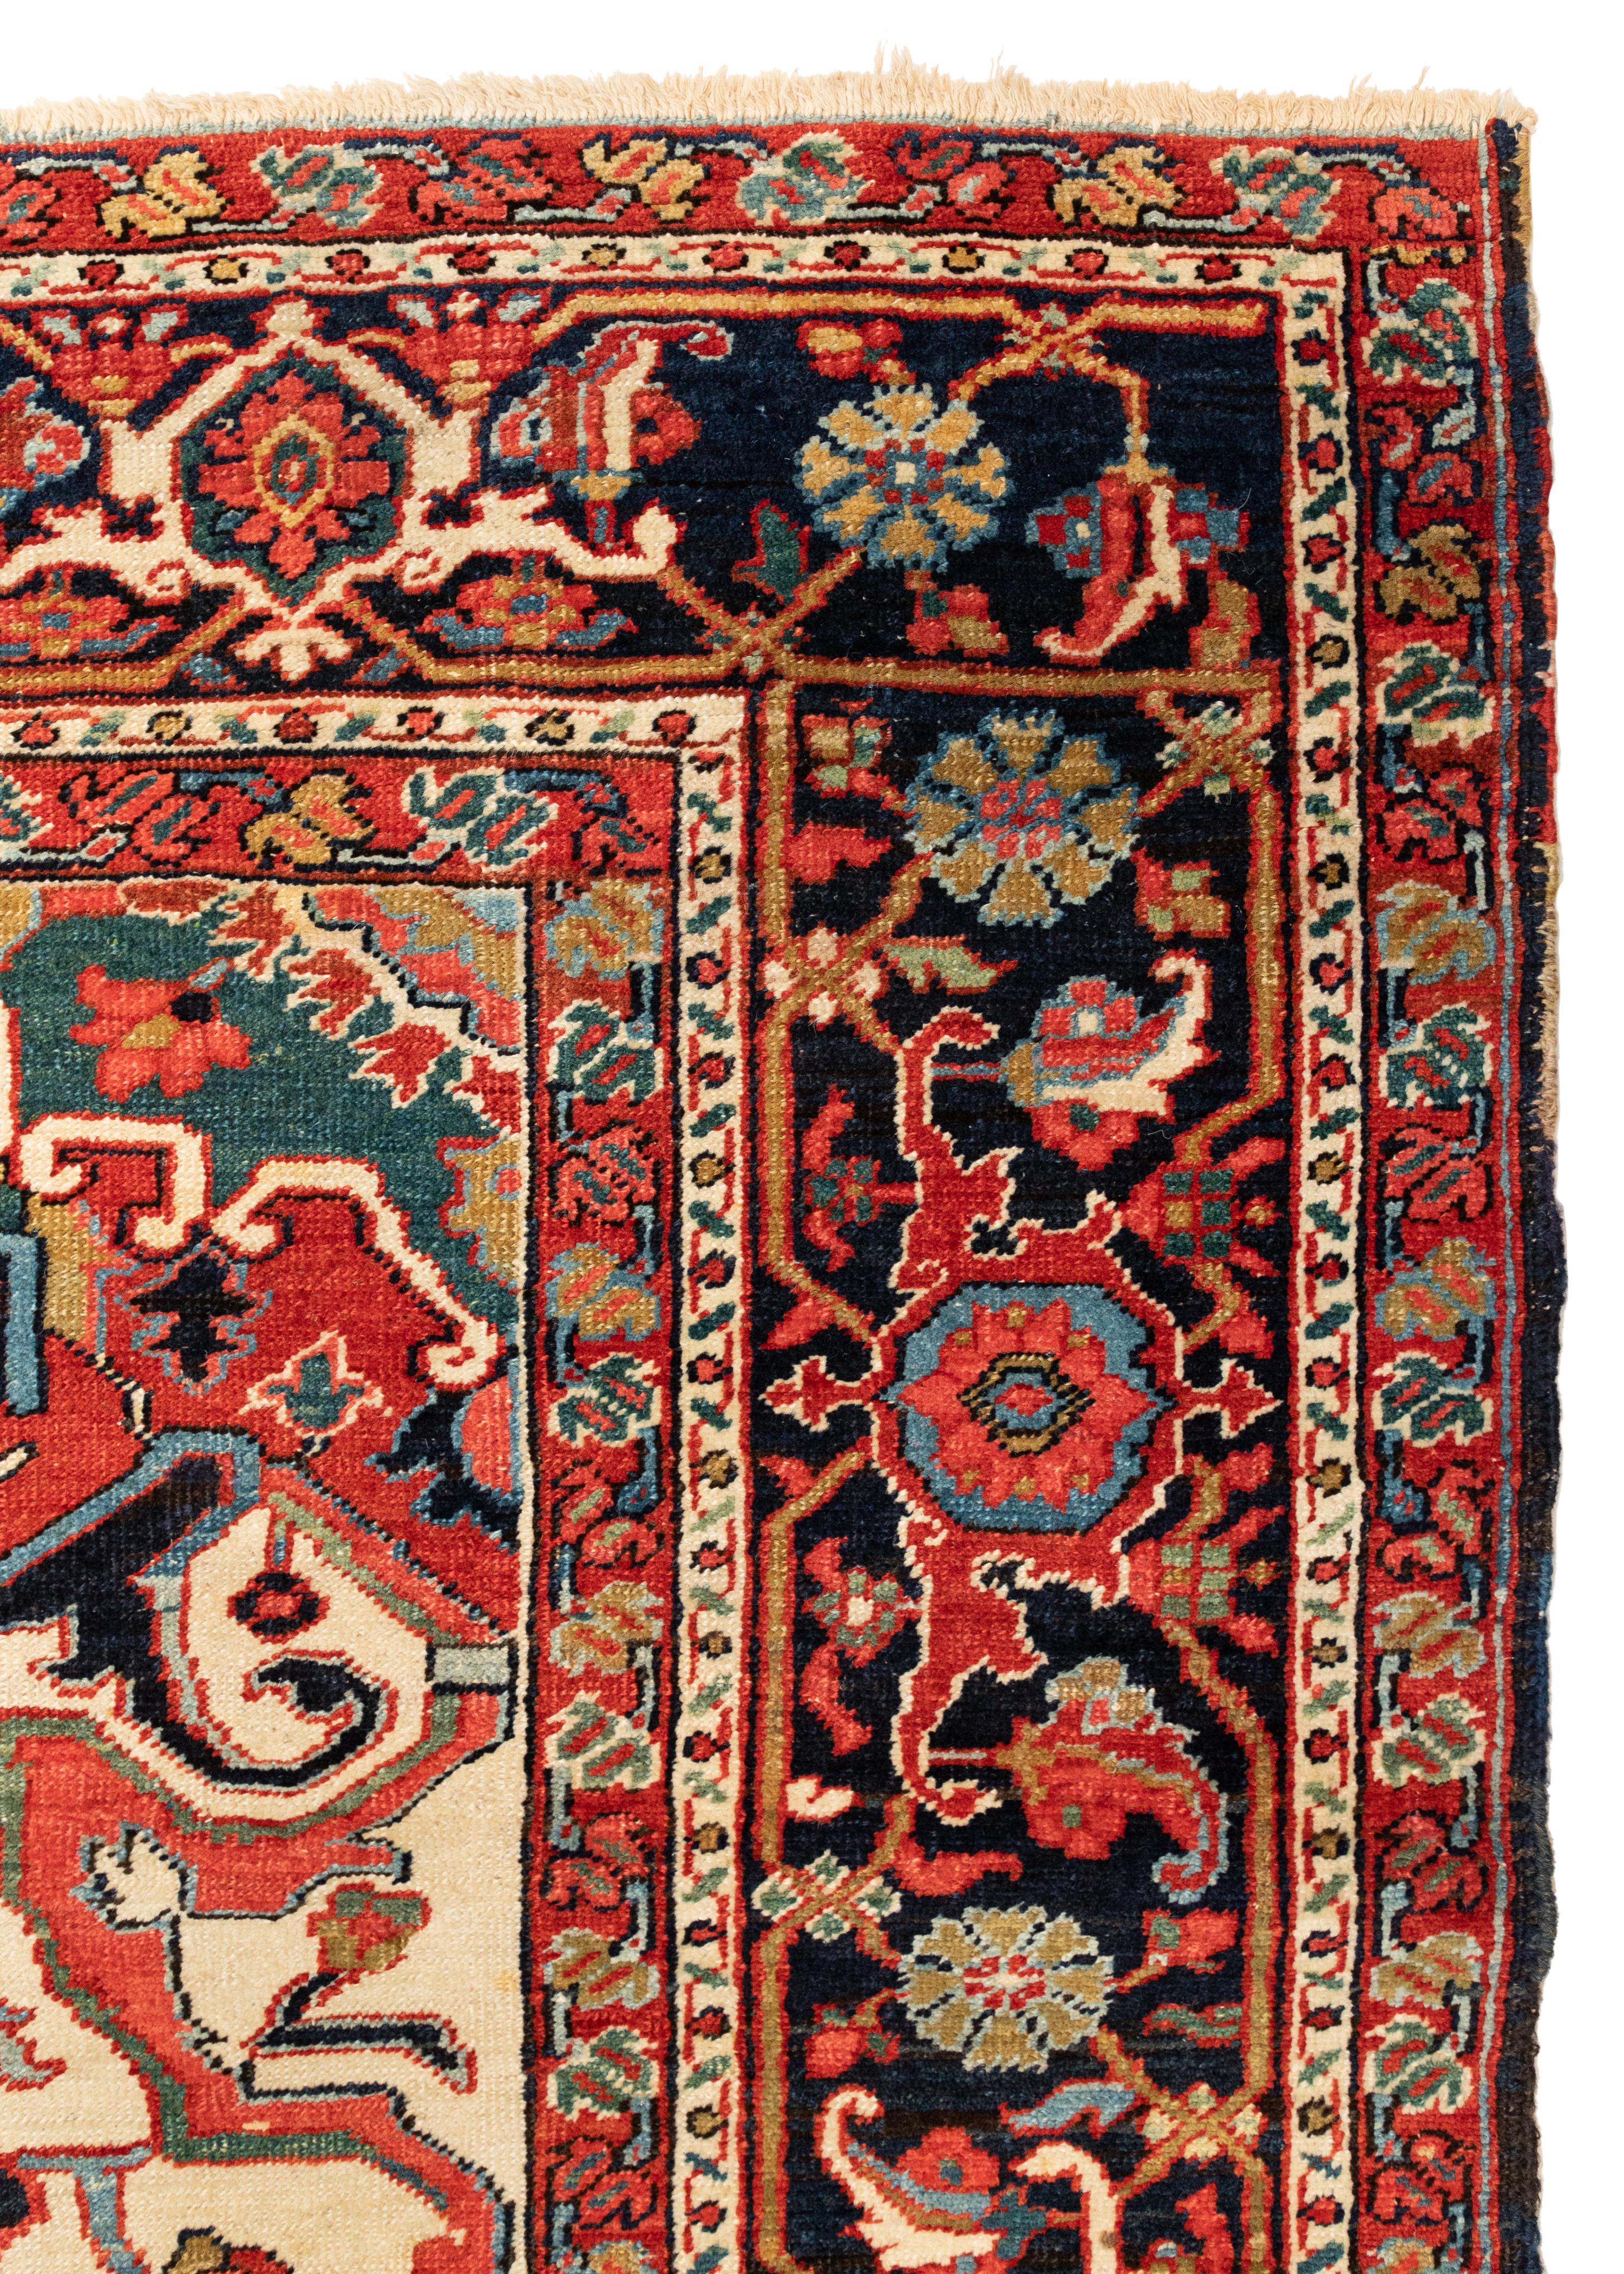 Antique Square Persian Serapi Rug 9.10 x 11.11 ft In Good Condition For Sale In New York, NY